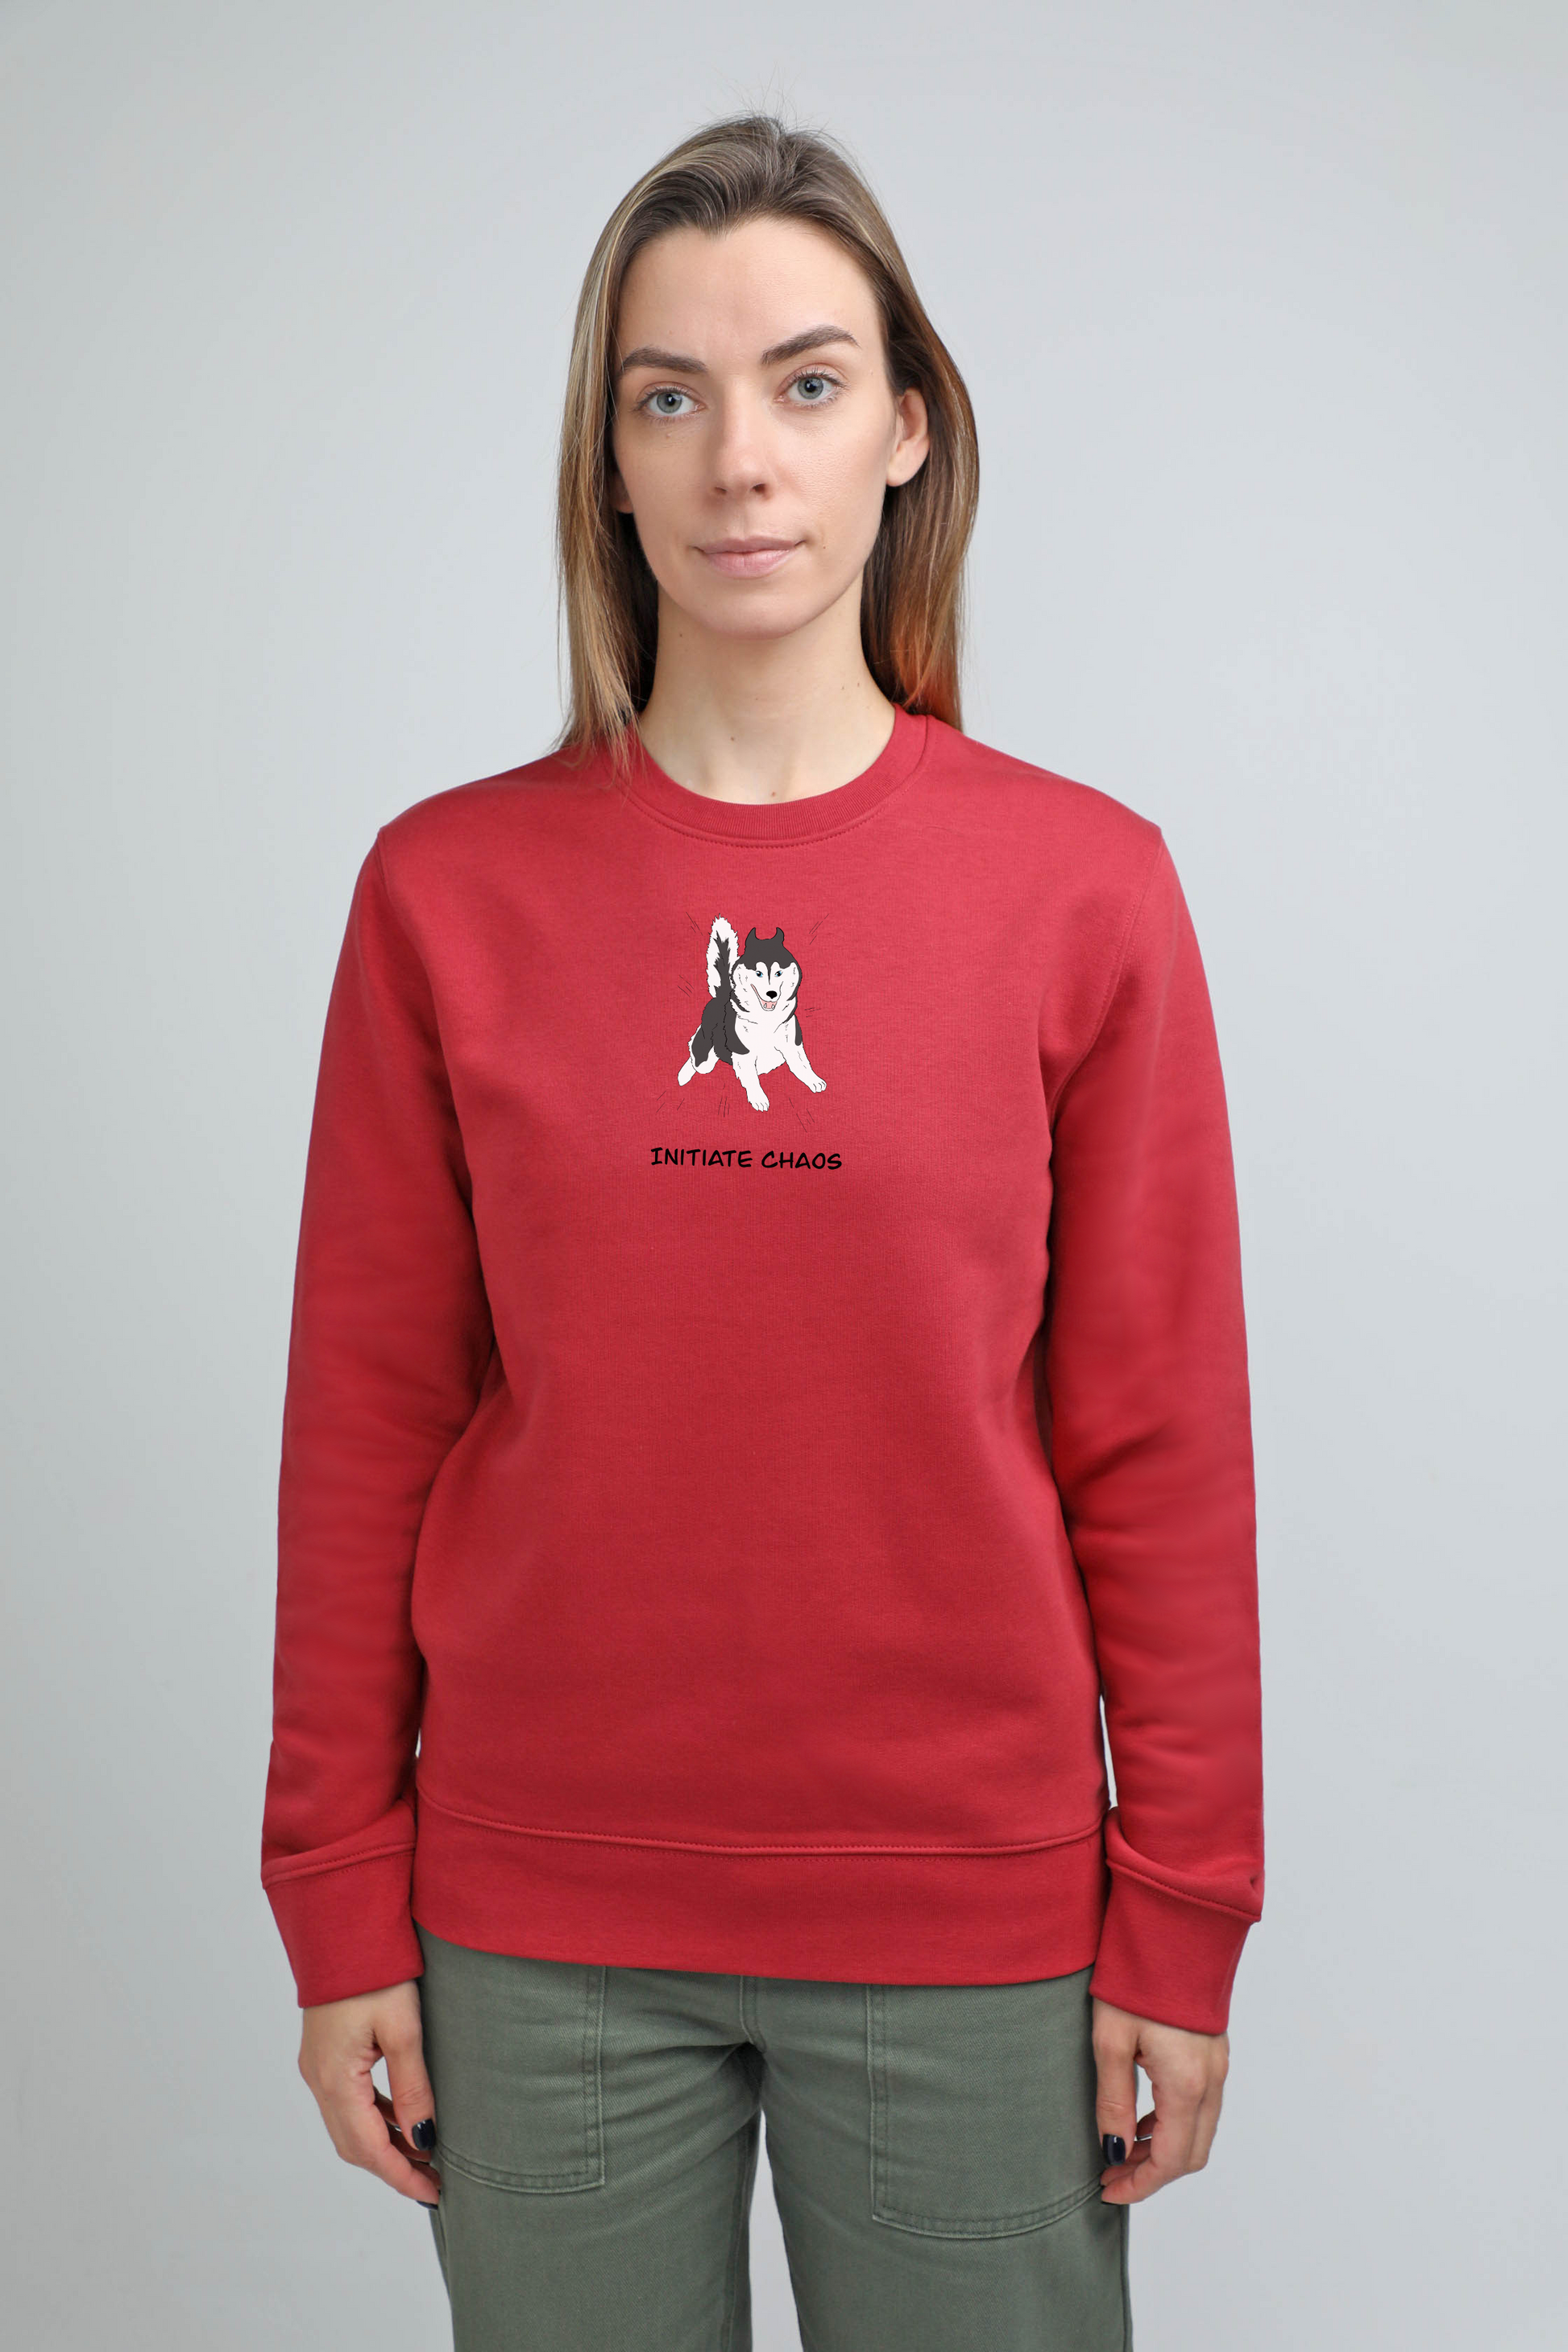 Chaos dog | Crew neck sweatshirt with dog. Regular fit | Unisex by My Wild Other